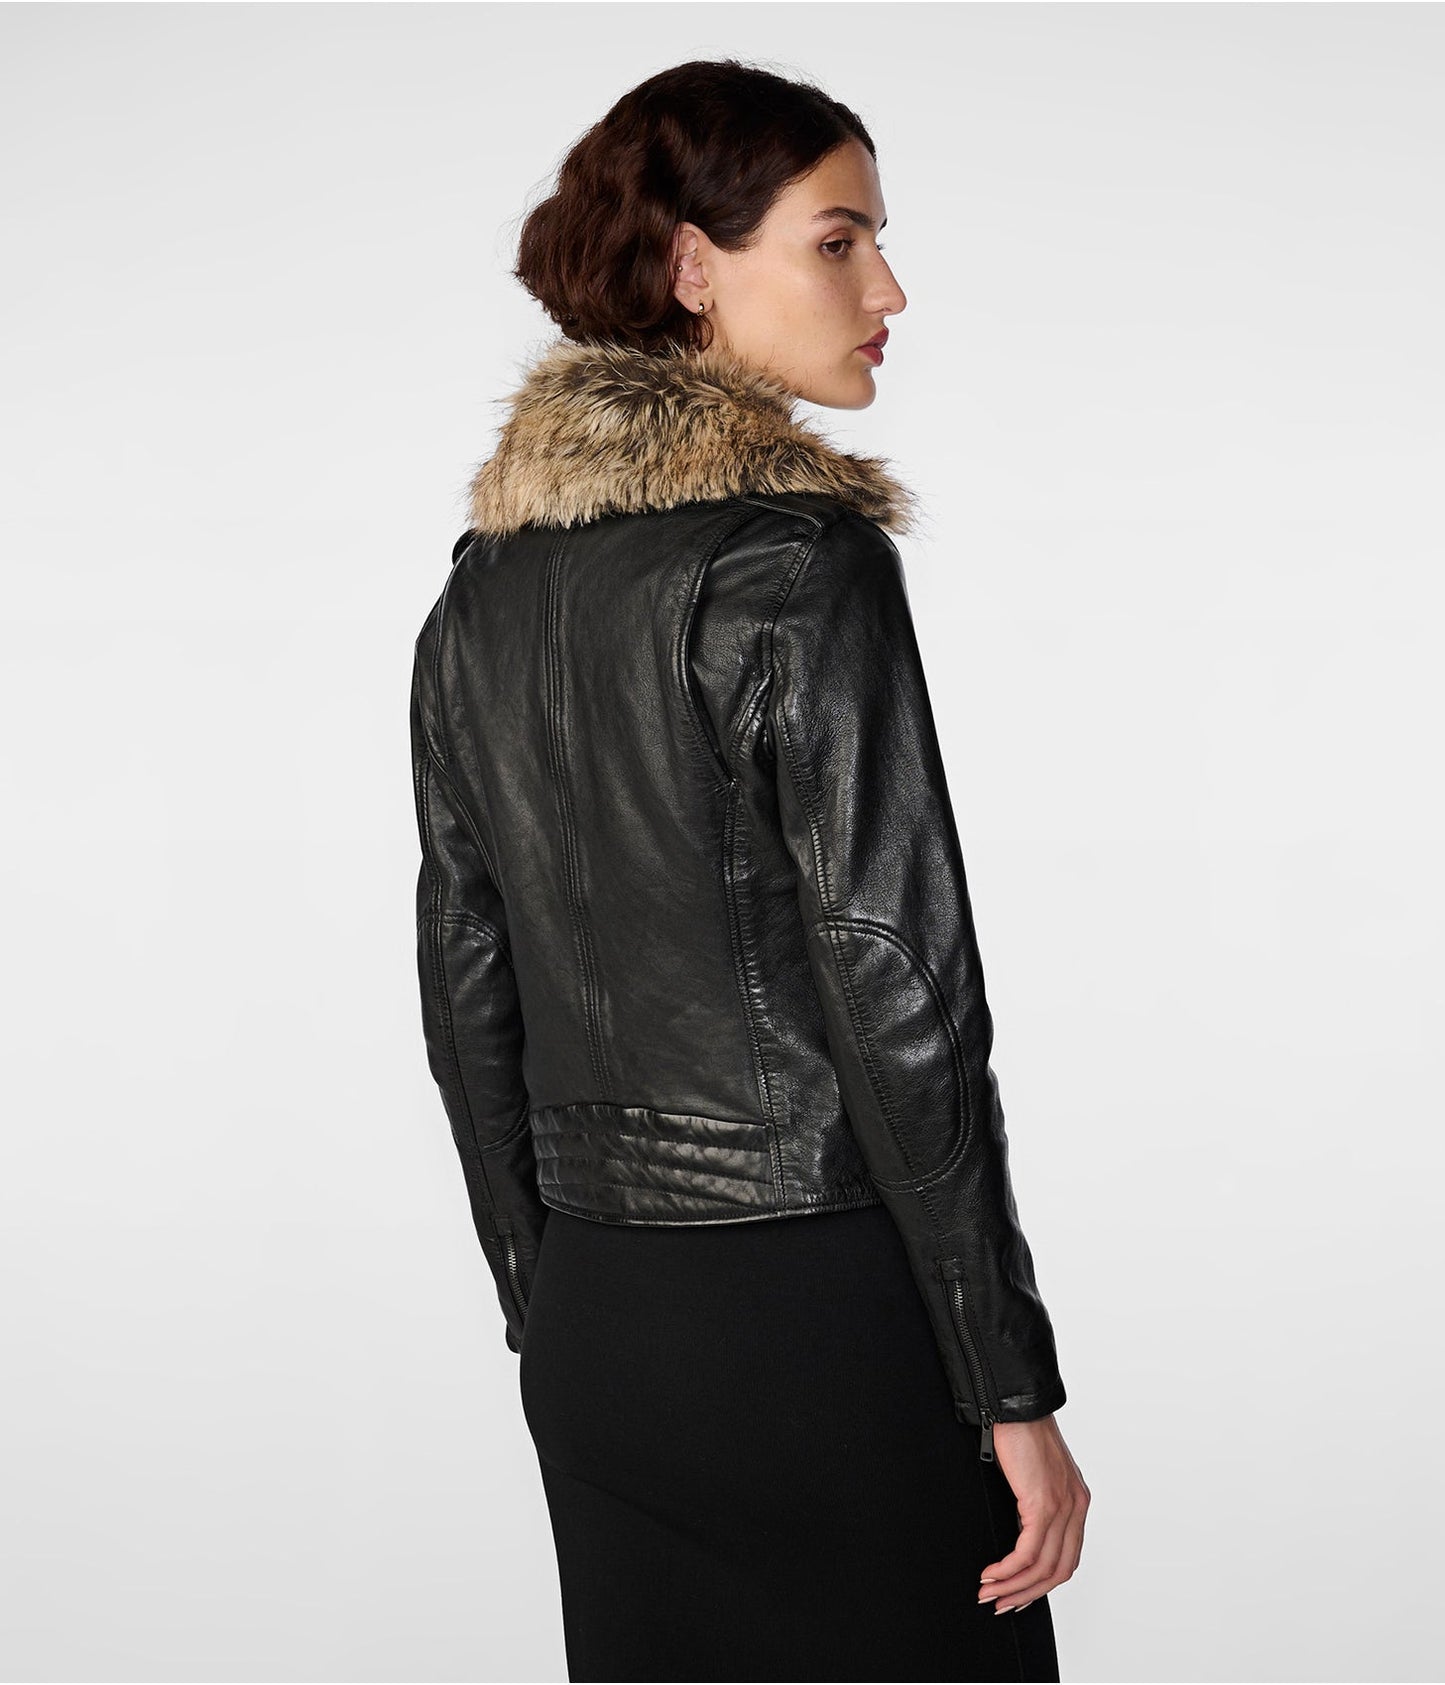 Women's Leather Biker Jacket In Black With Removable Fur Collar